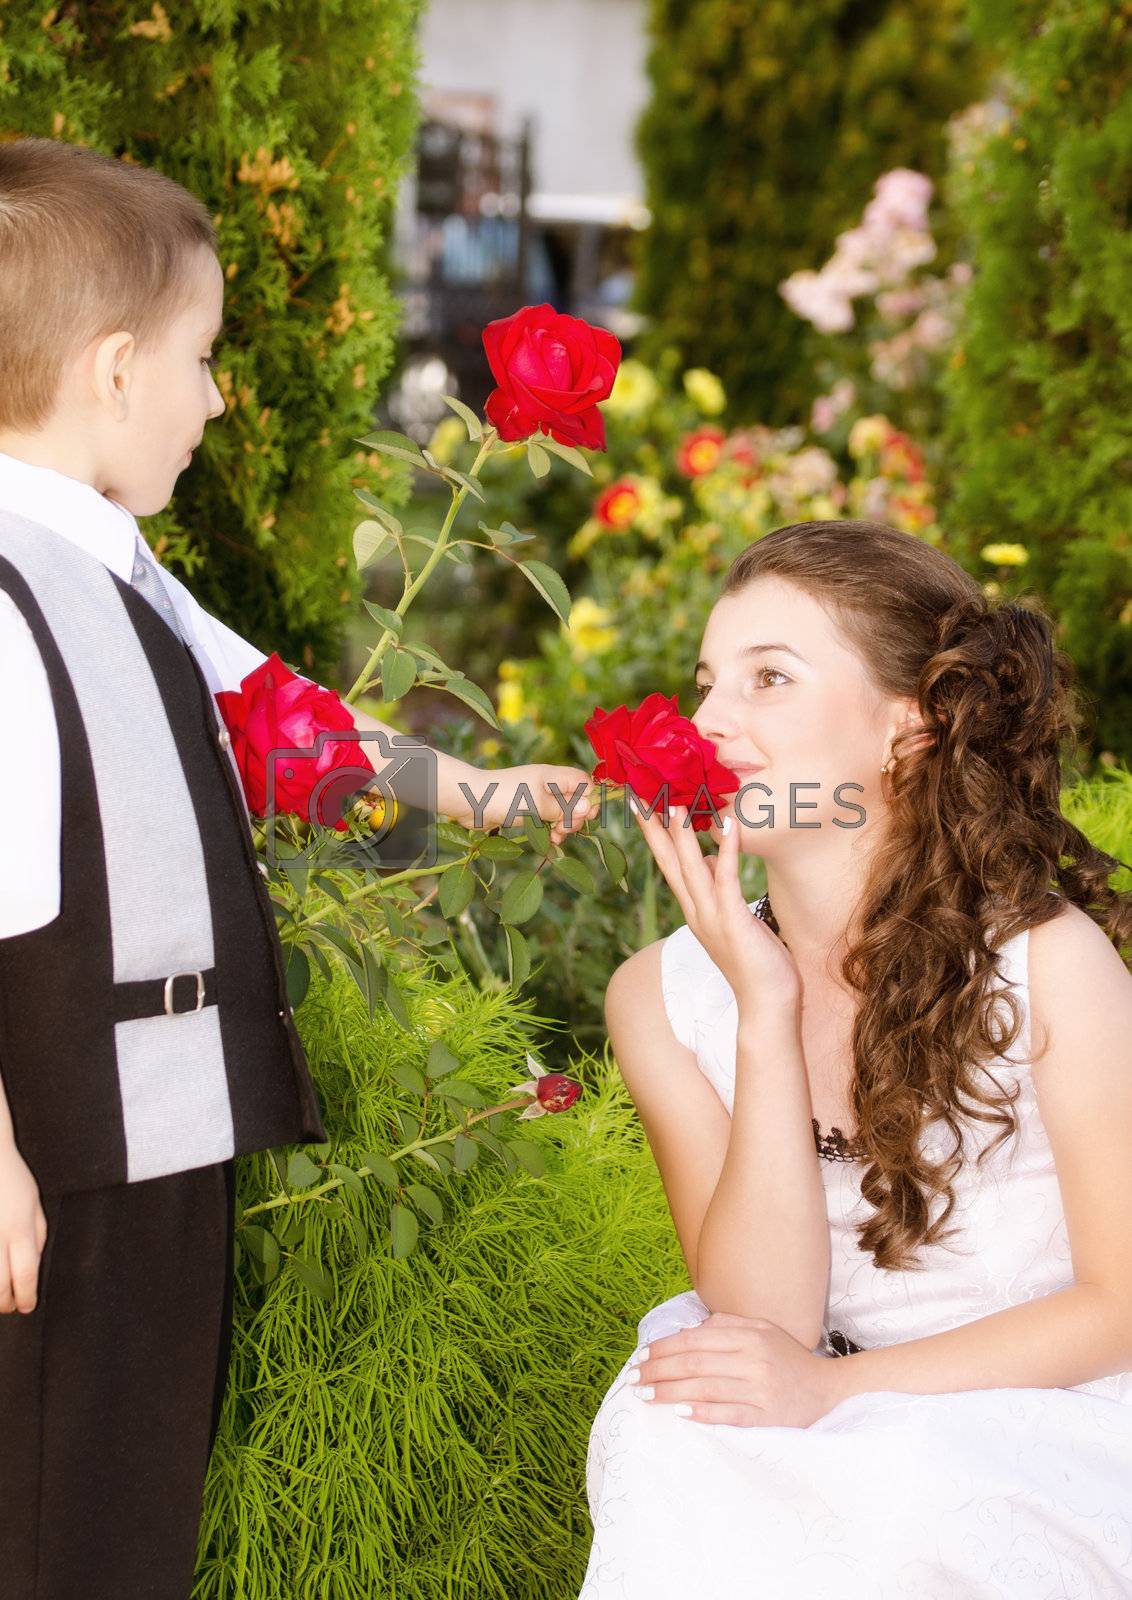 Little boy giving a rose to a beautiful girl